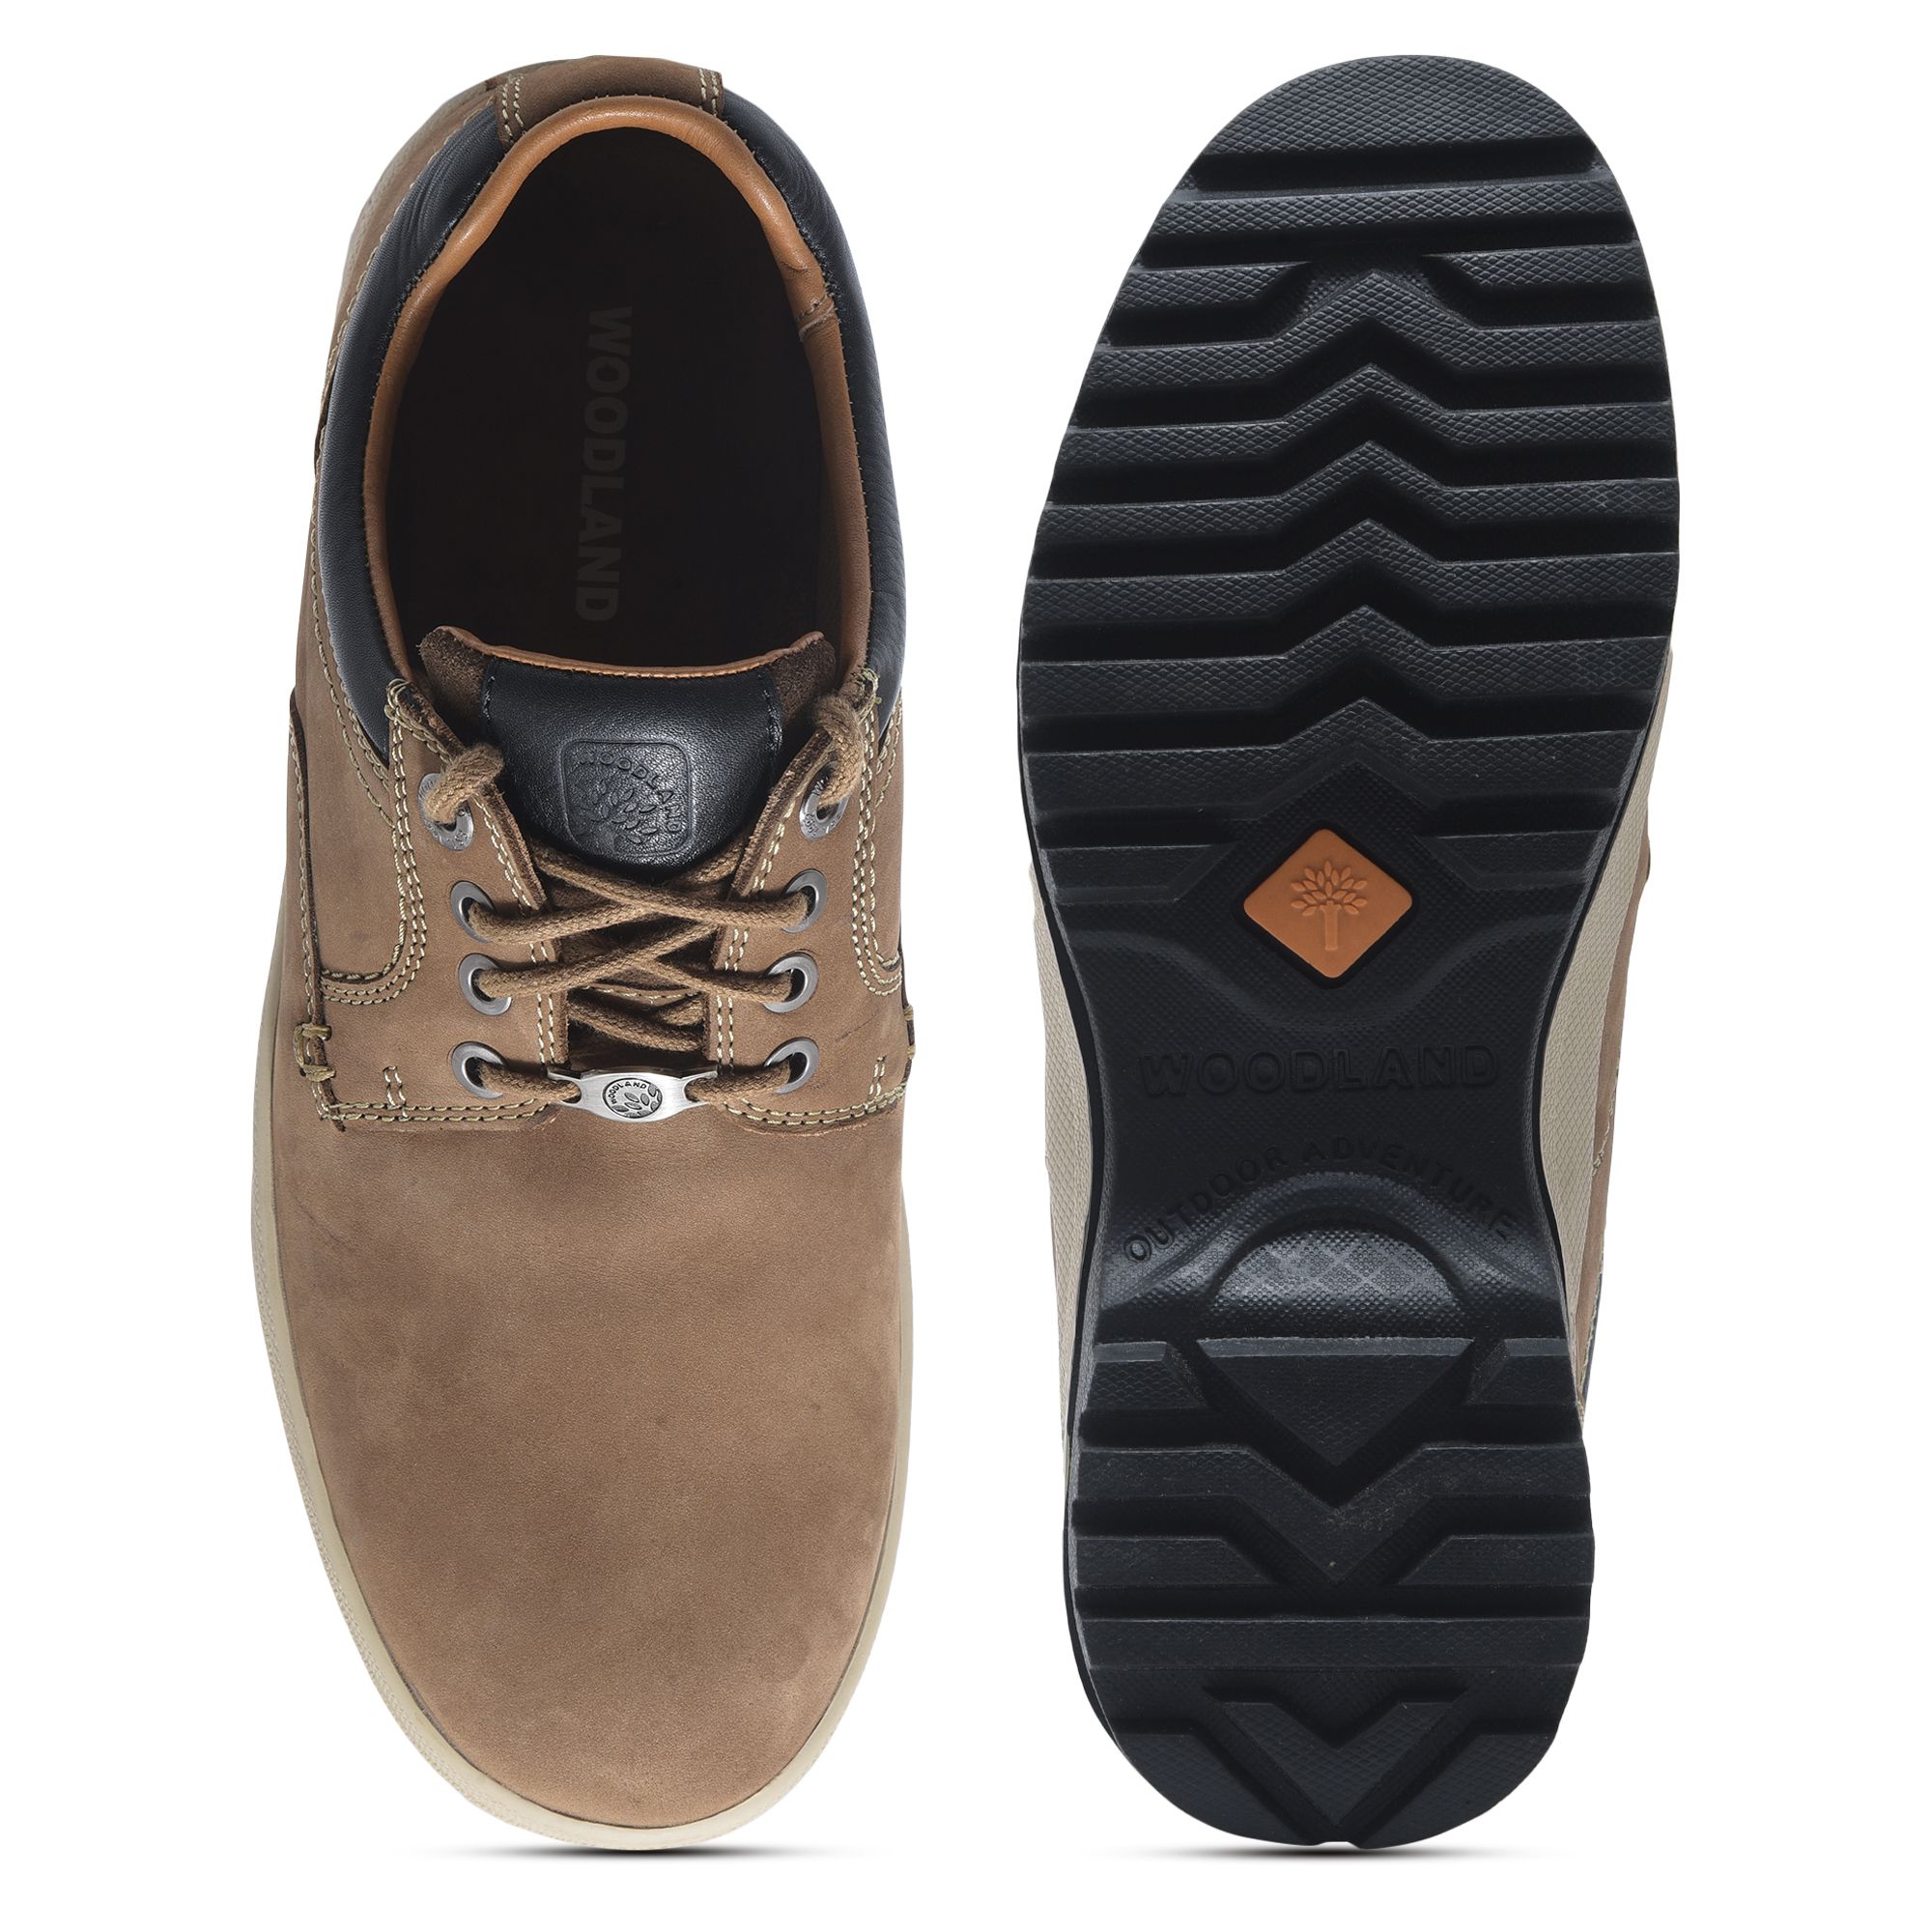 Tobacco casual shoes for men